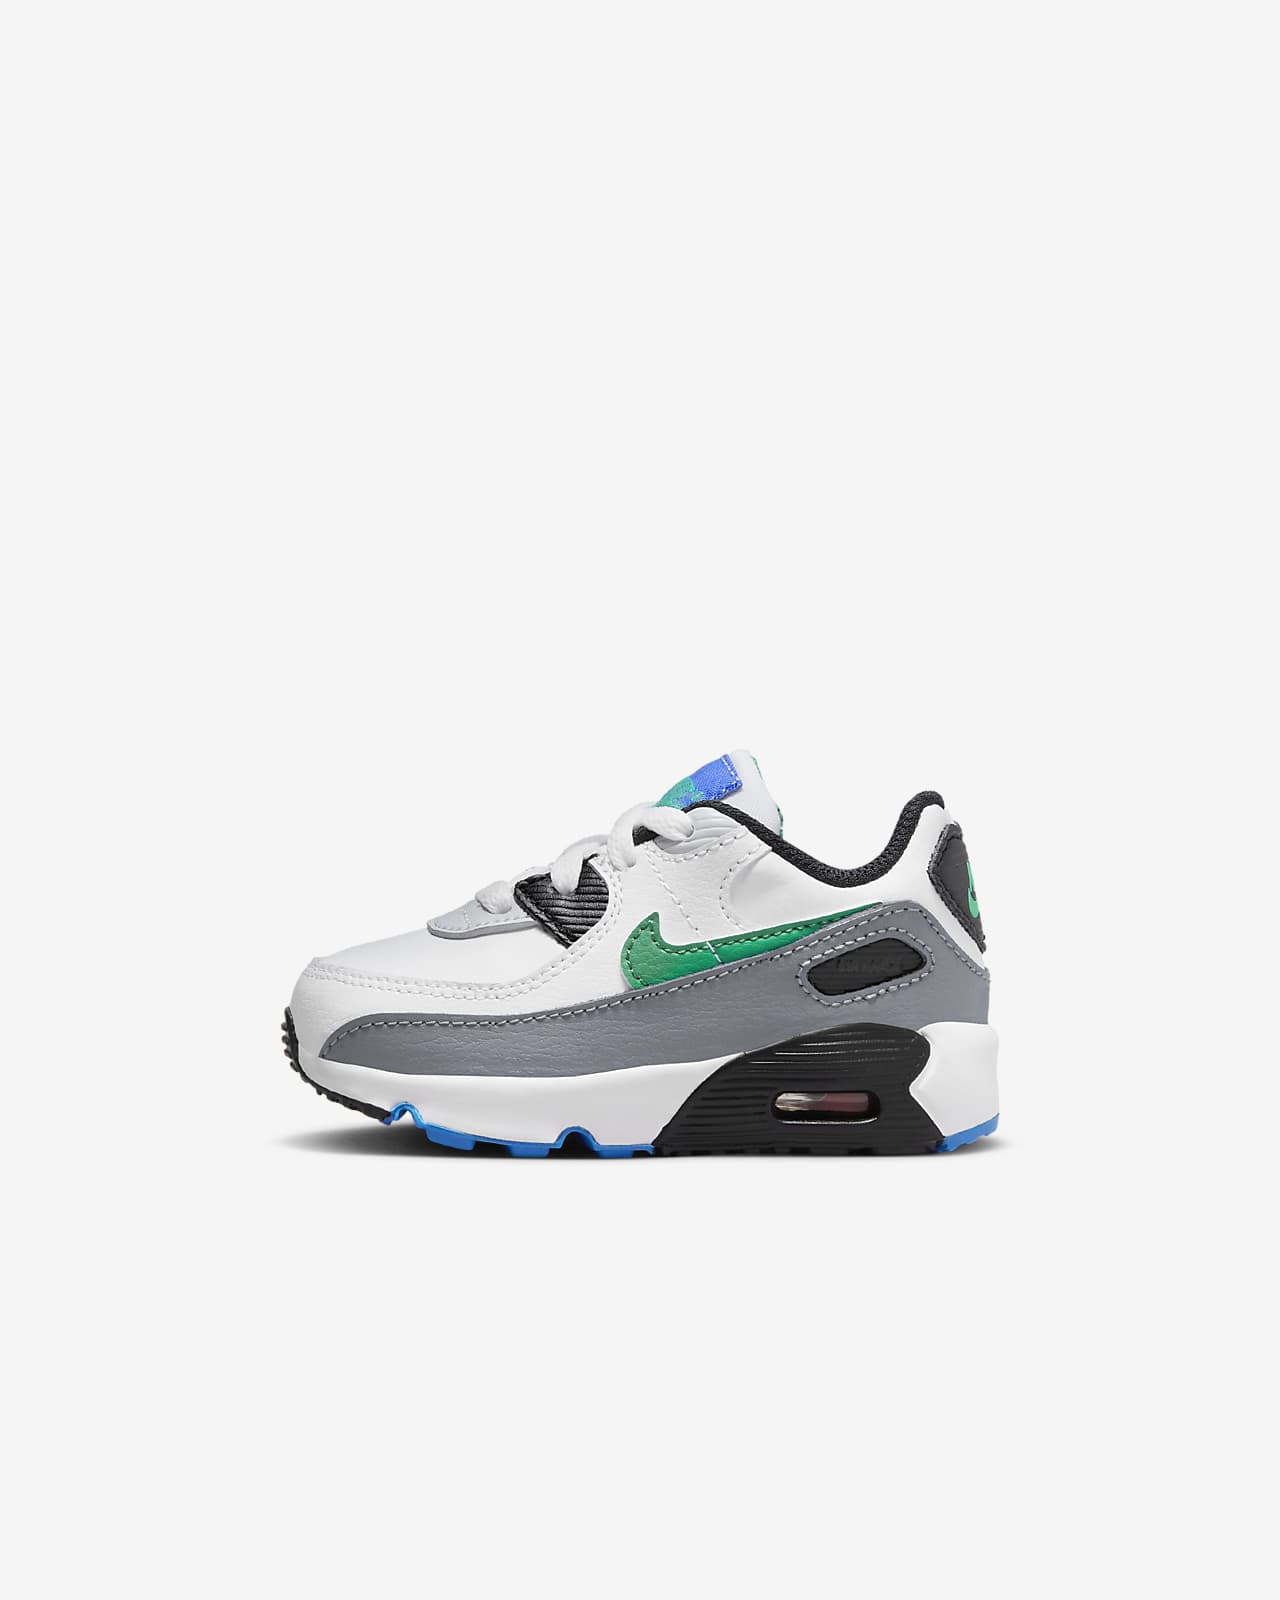 realiteit Giet toewijzing Nike Air Max 90 LTR Baby/Toddler Shoes. Nike.com